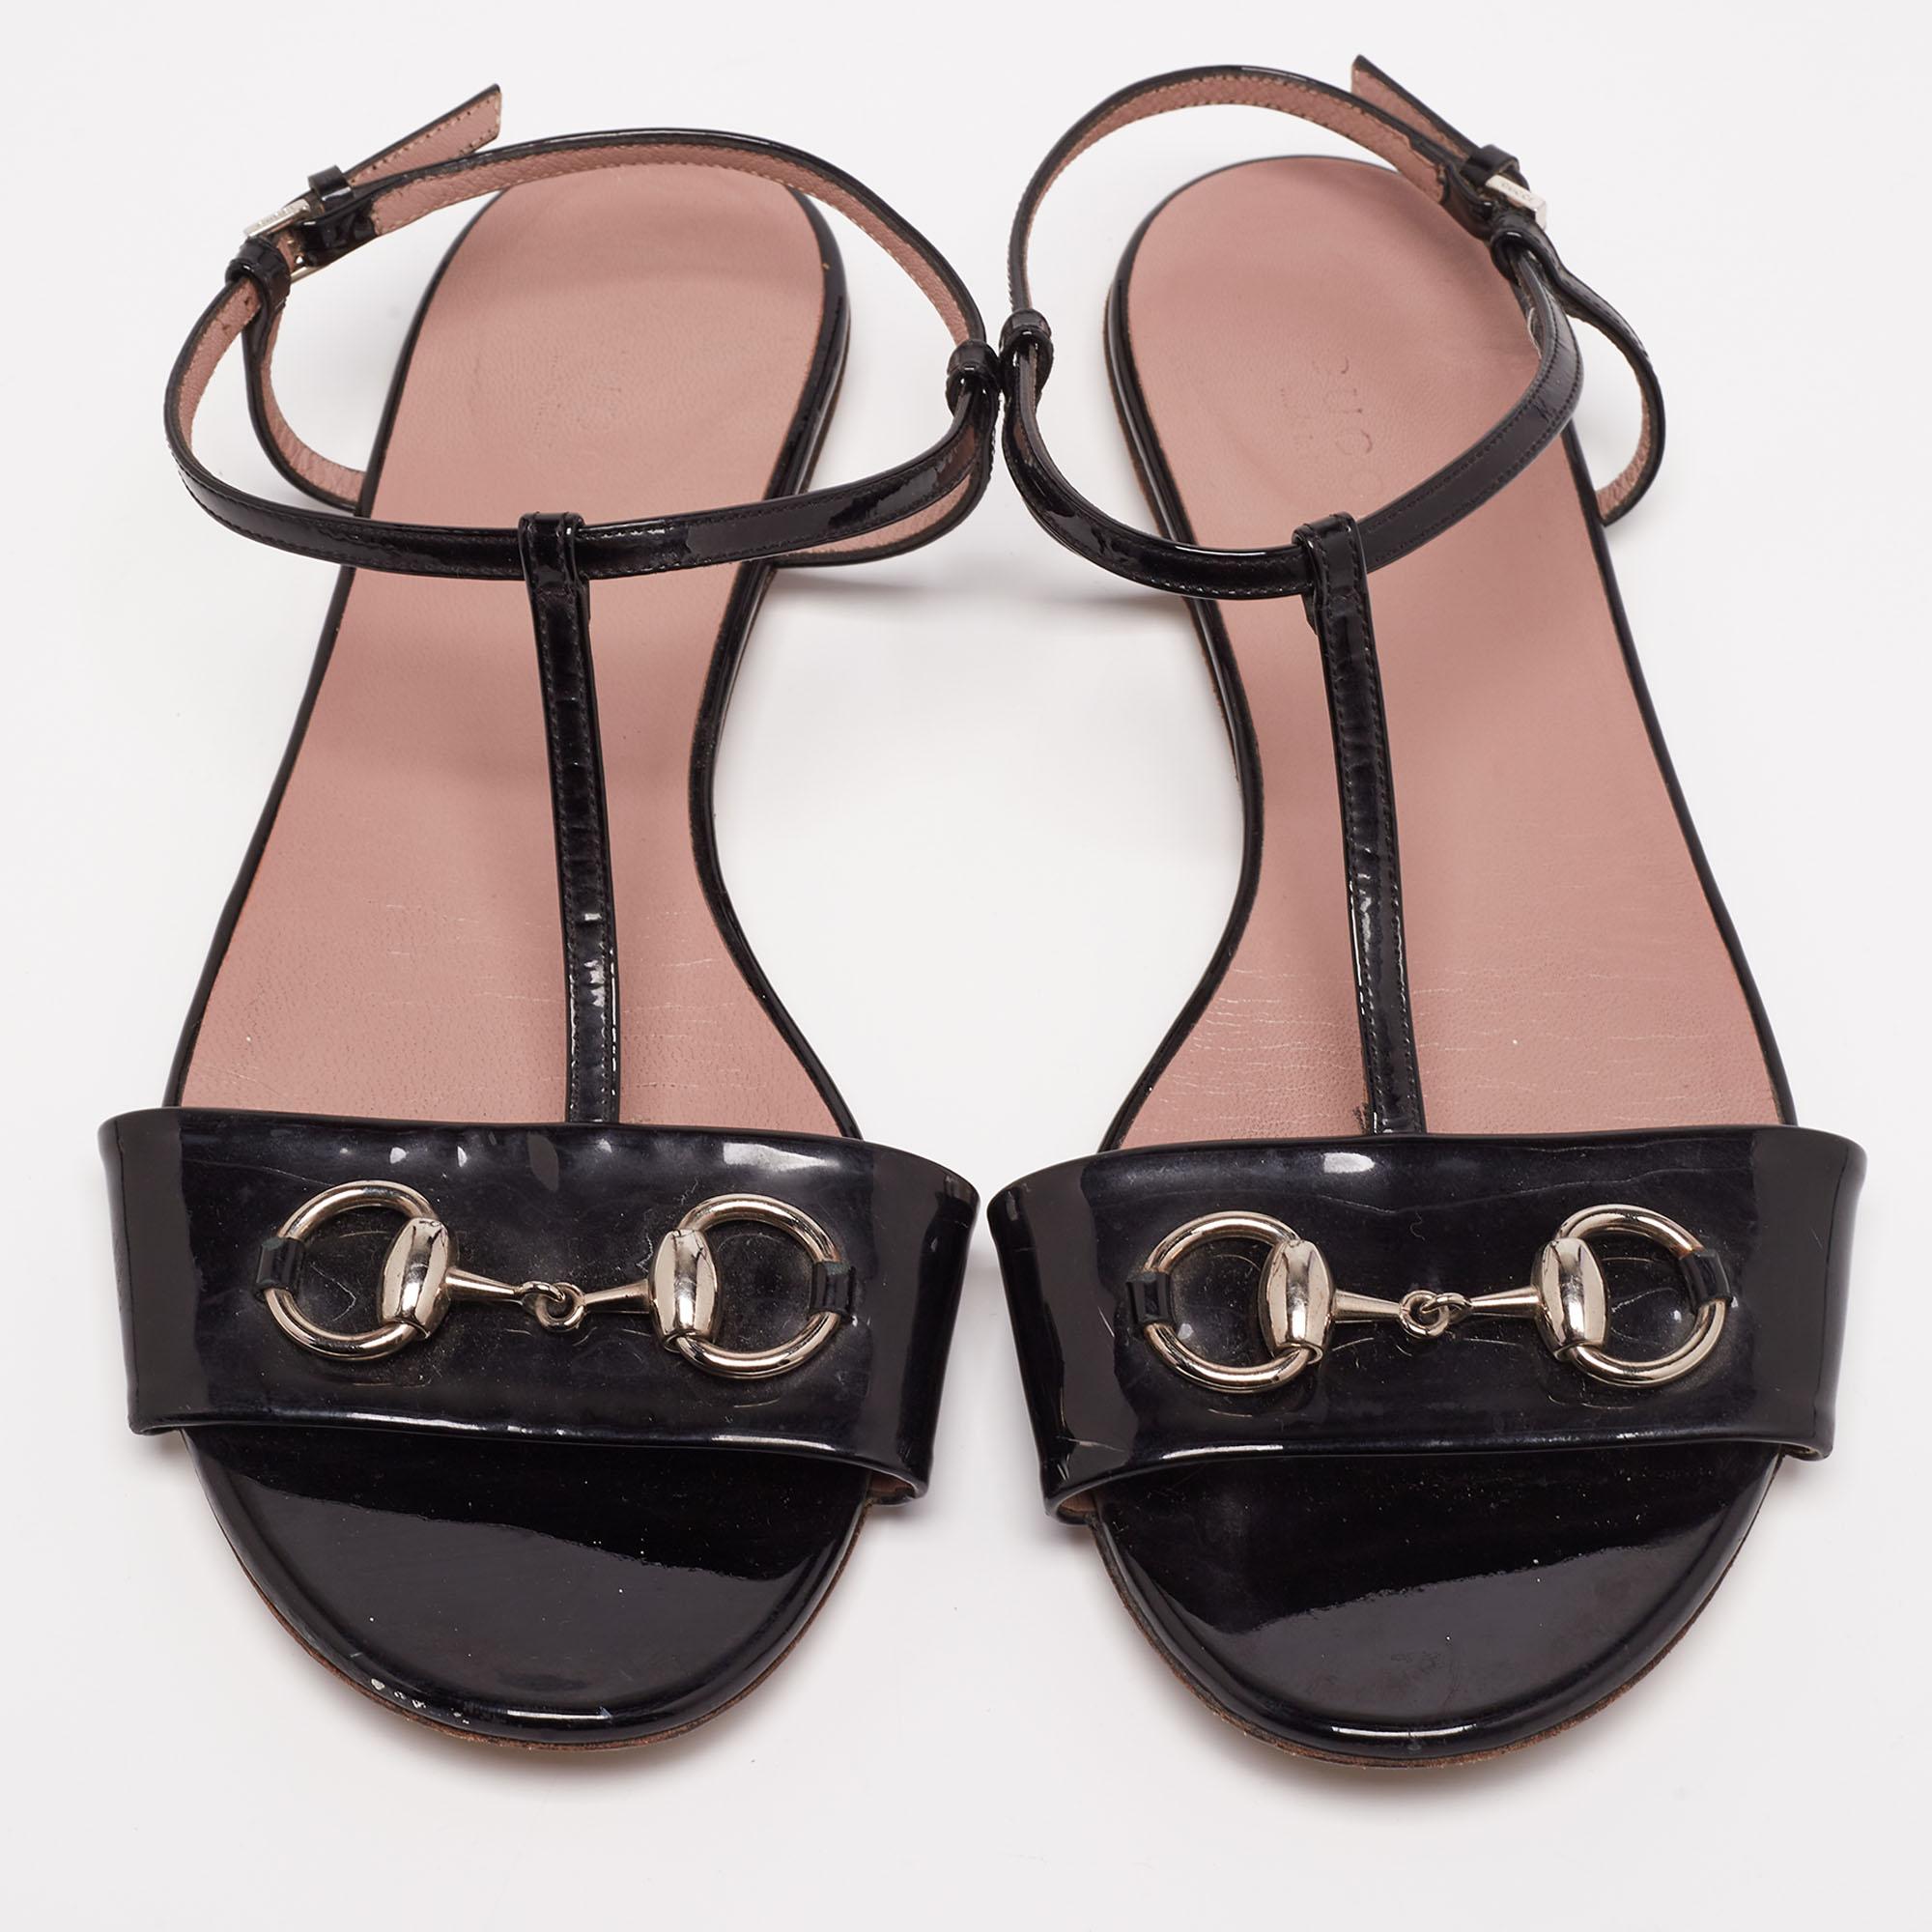 Designed to keep your steps light and stylish, these Gucci flats are made using patent leather. They feature open toes, Horsebit accents on the uppers, and buckle closure around the ankles. The black flats will be a great option on any